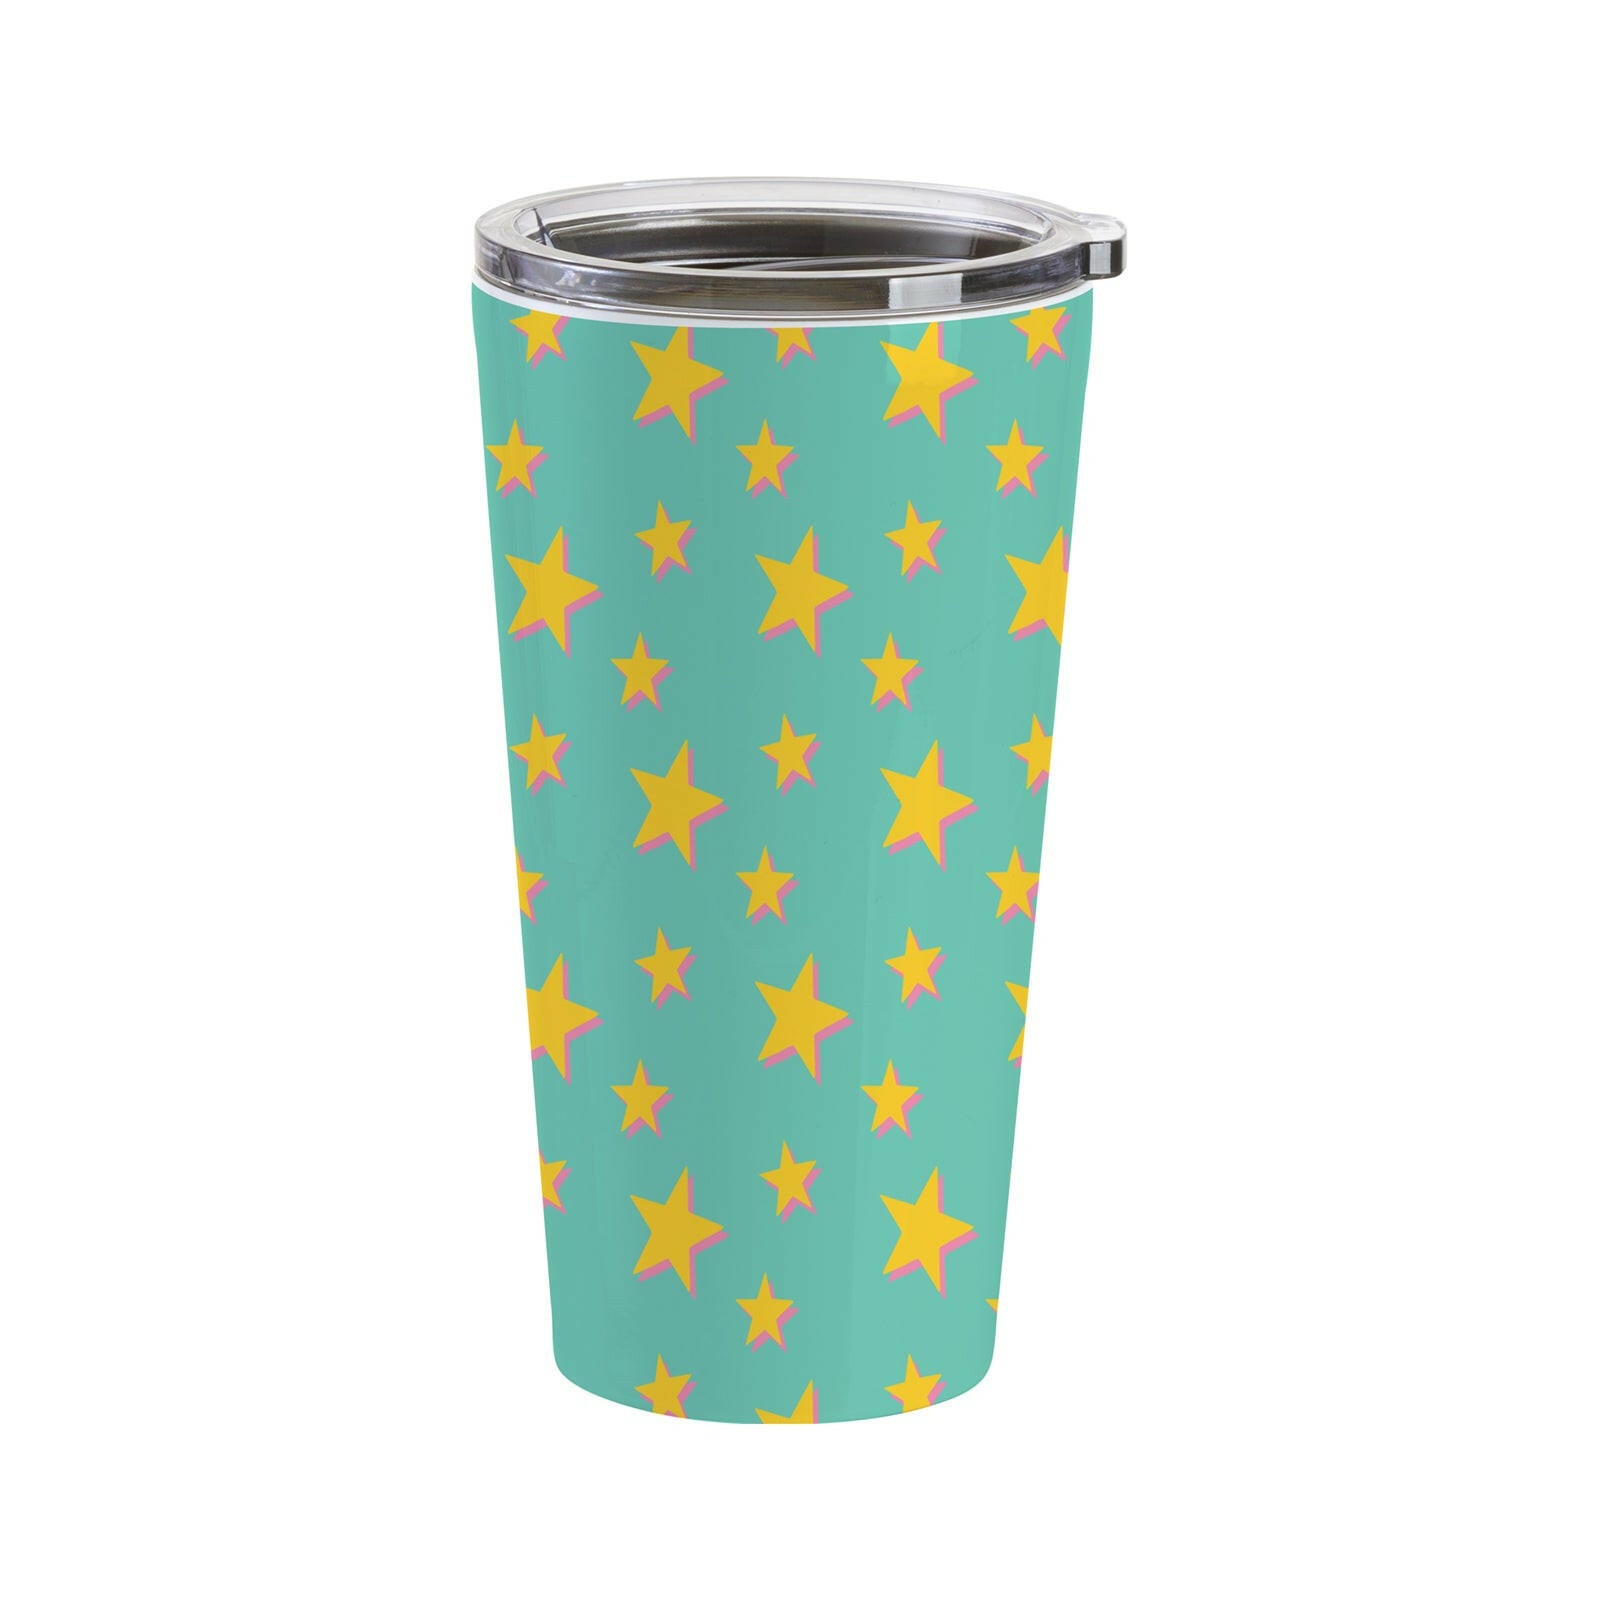 16oz Stainless Steel Sublimation Tumblers - 4 Pack.